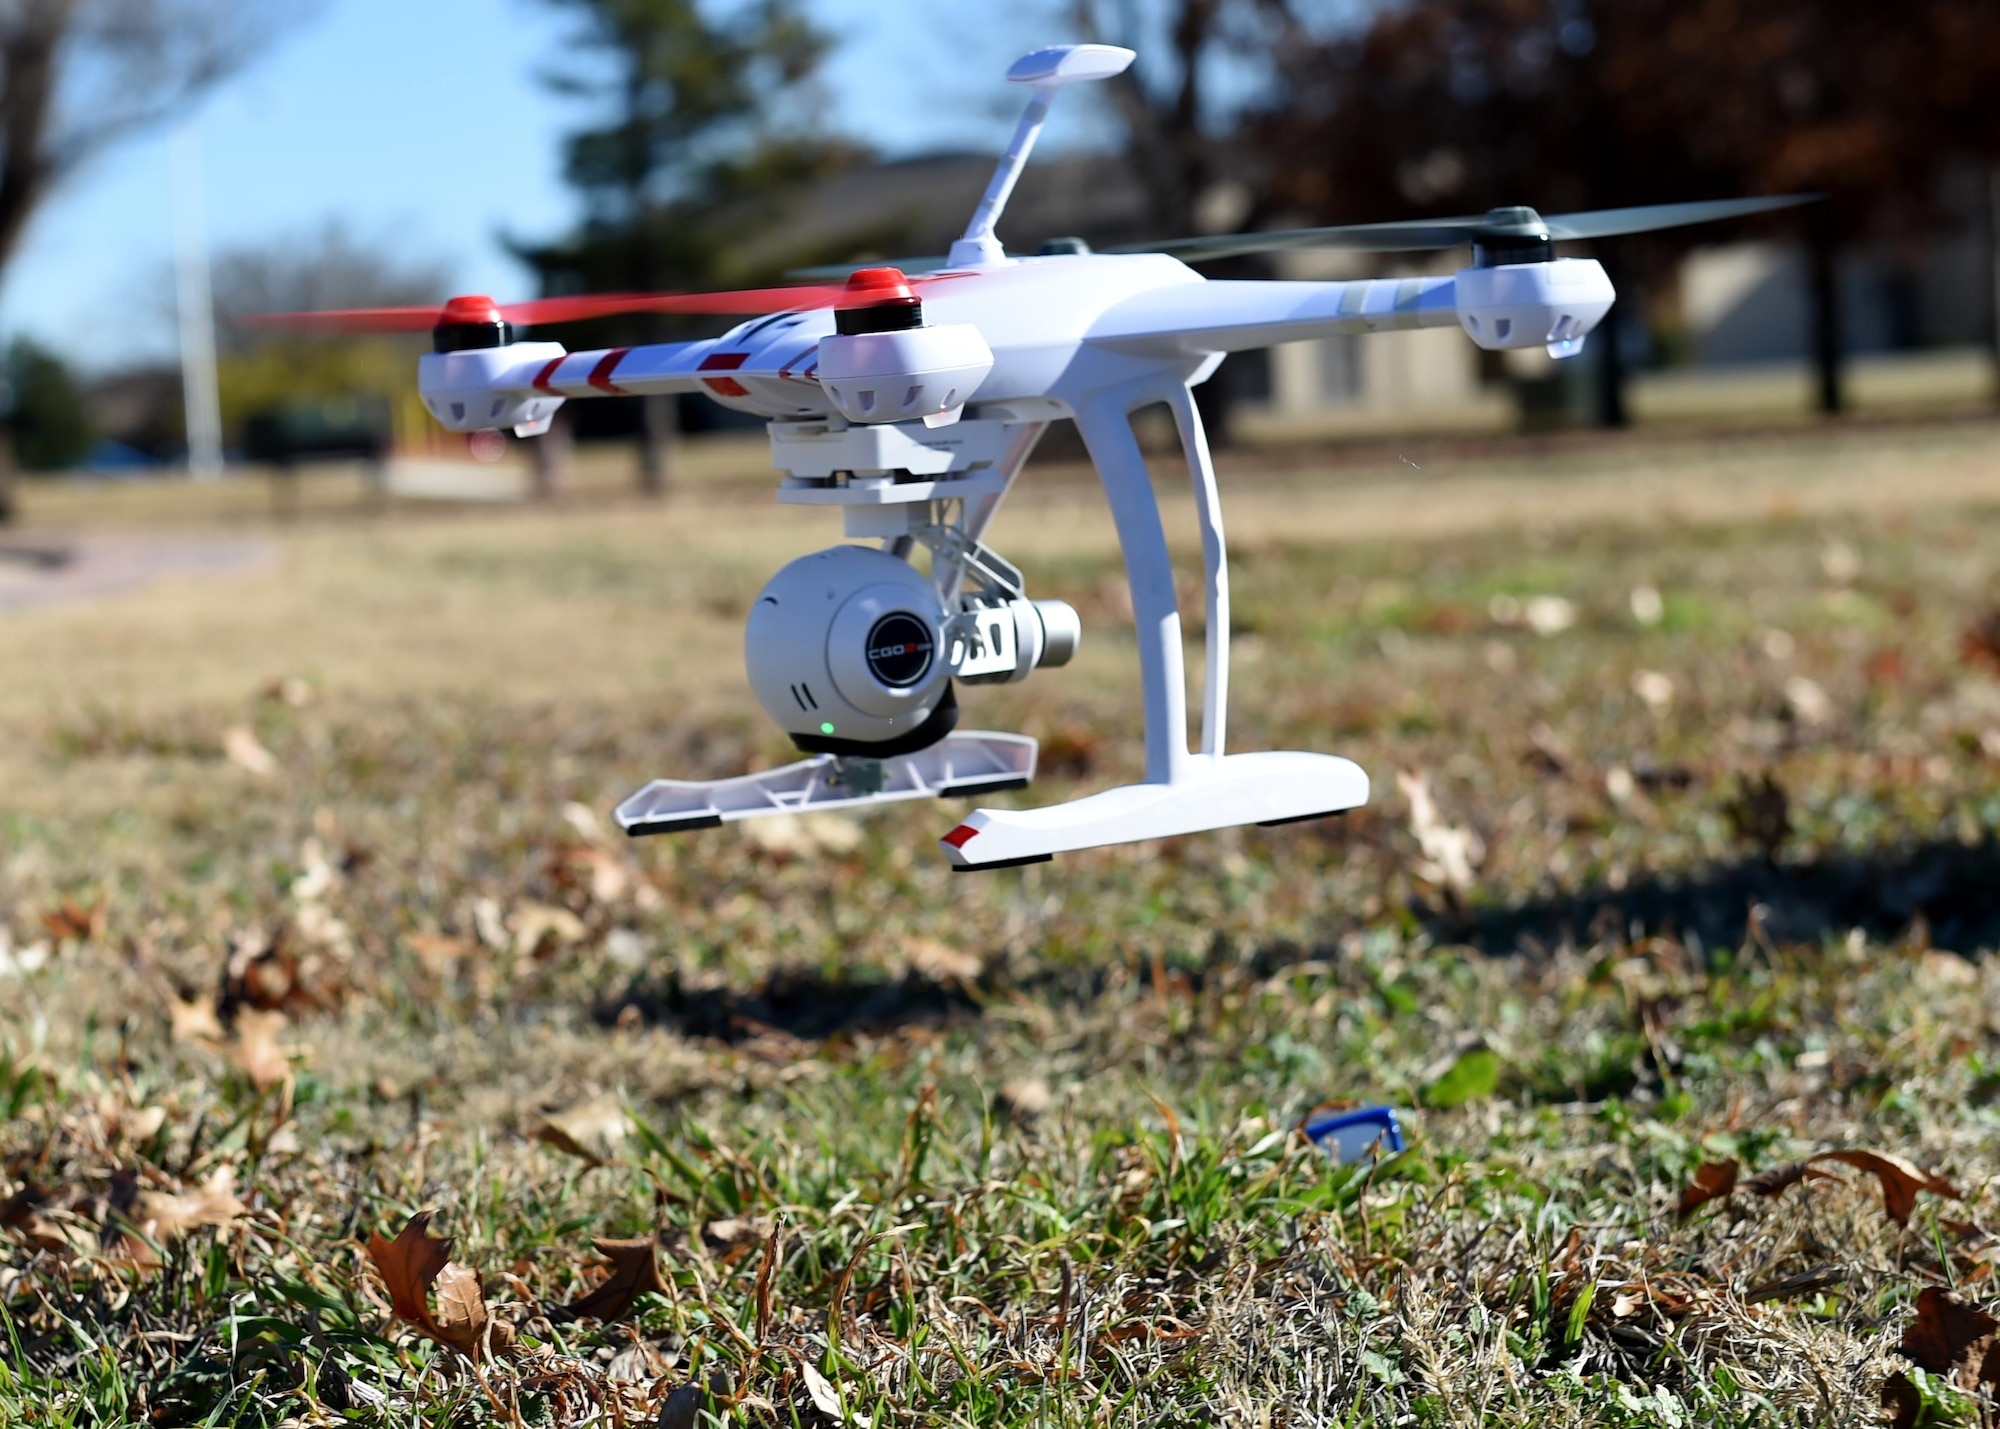 A drone is flown to demonstrate how it is used for official purposes at Wings of Freedom Park, Dec. 15, 2015. With the increase of drones’ popularity in the last few years, laws restricting the use of drones within 5 miles of an airbase have been made but some exceptions are made for official tasks such as checking roofs and showing cleared roadways on base. (U.S. Air Force photo by Airman 1st Class Kirby Turbak/Released)